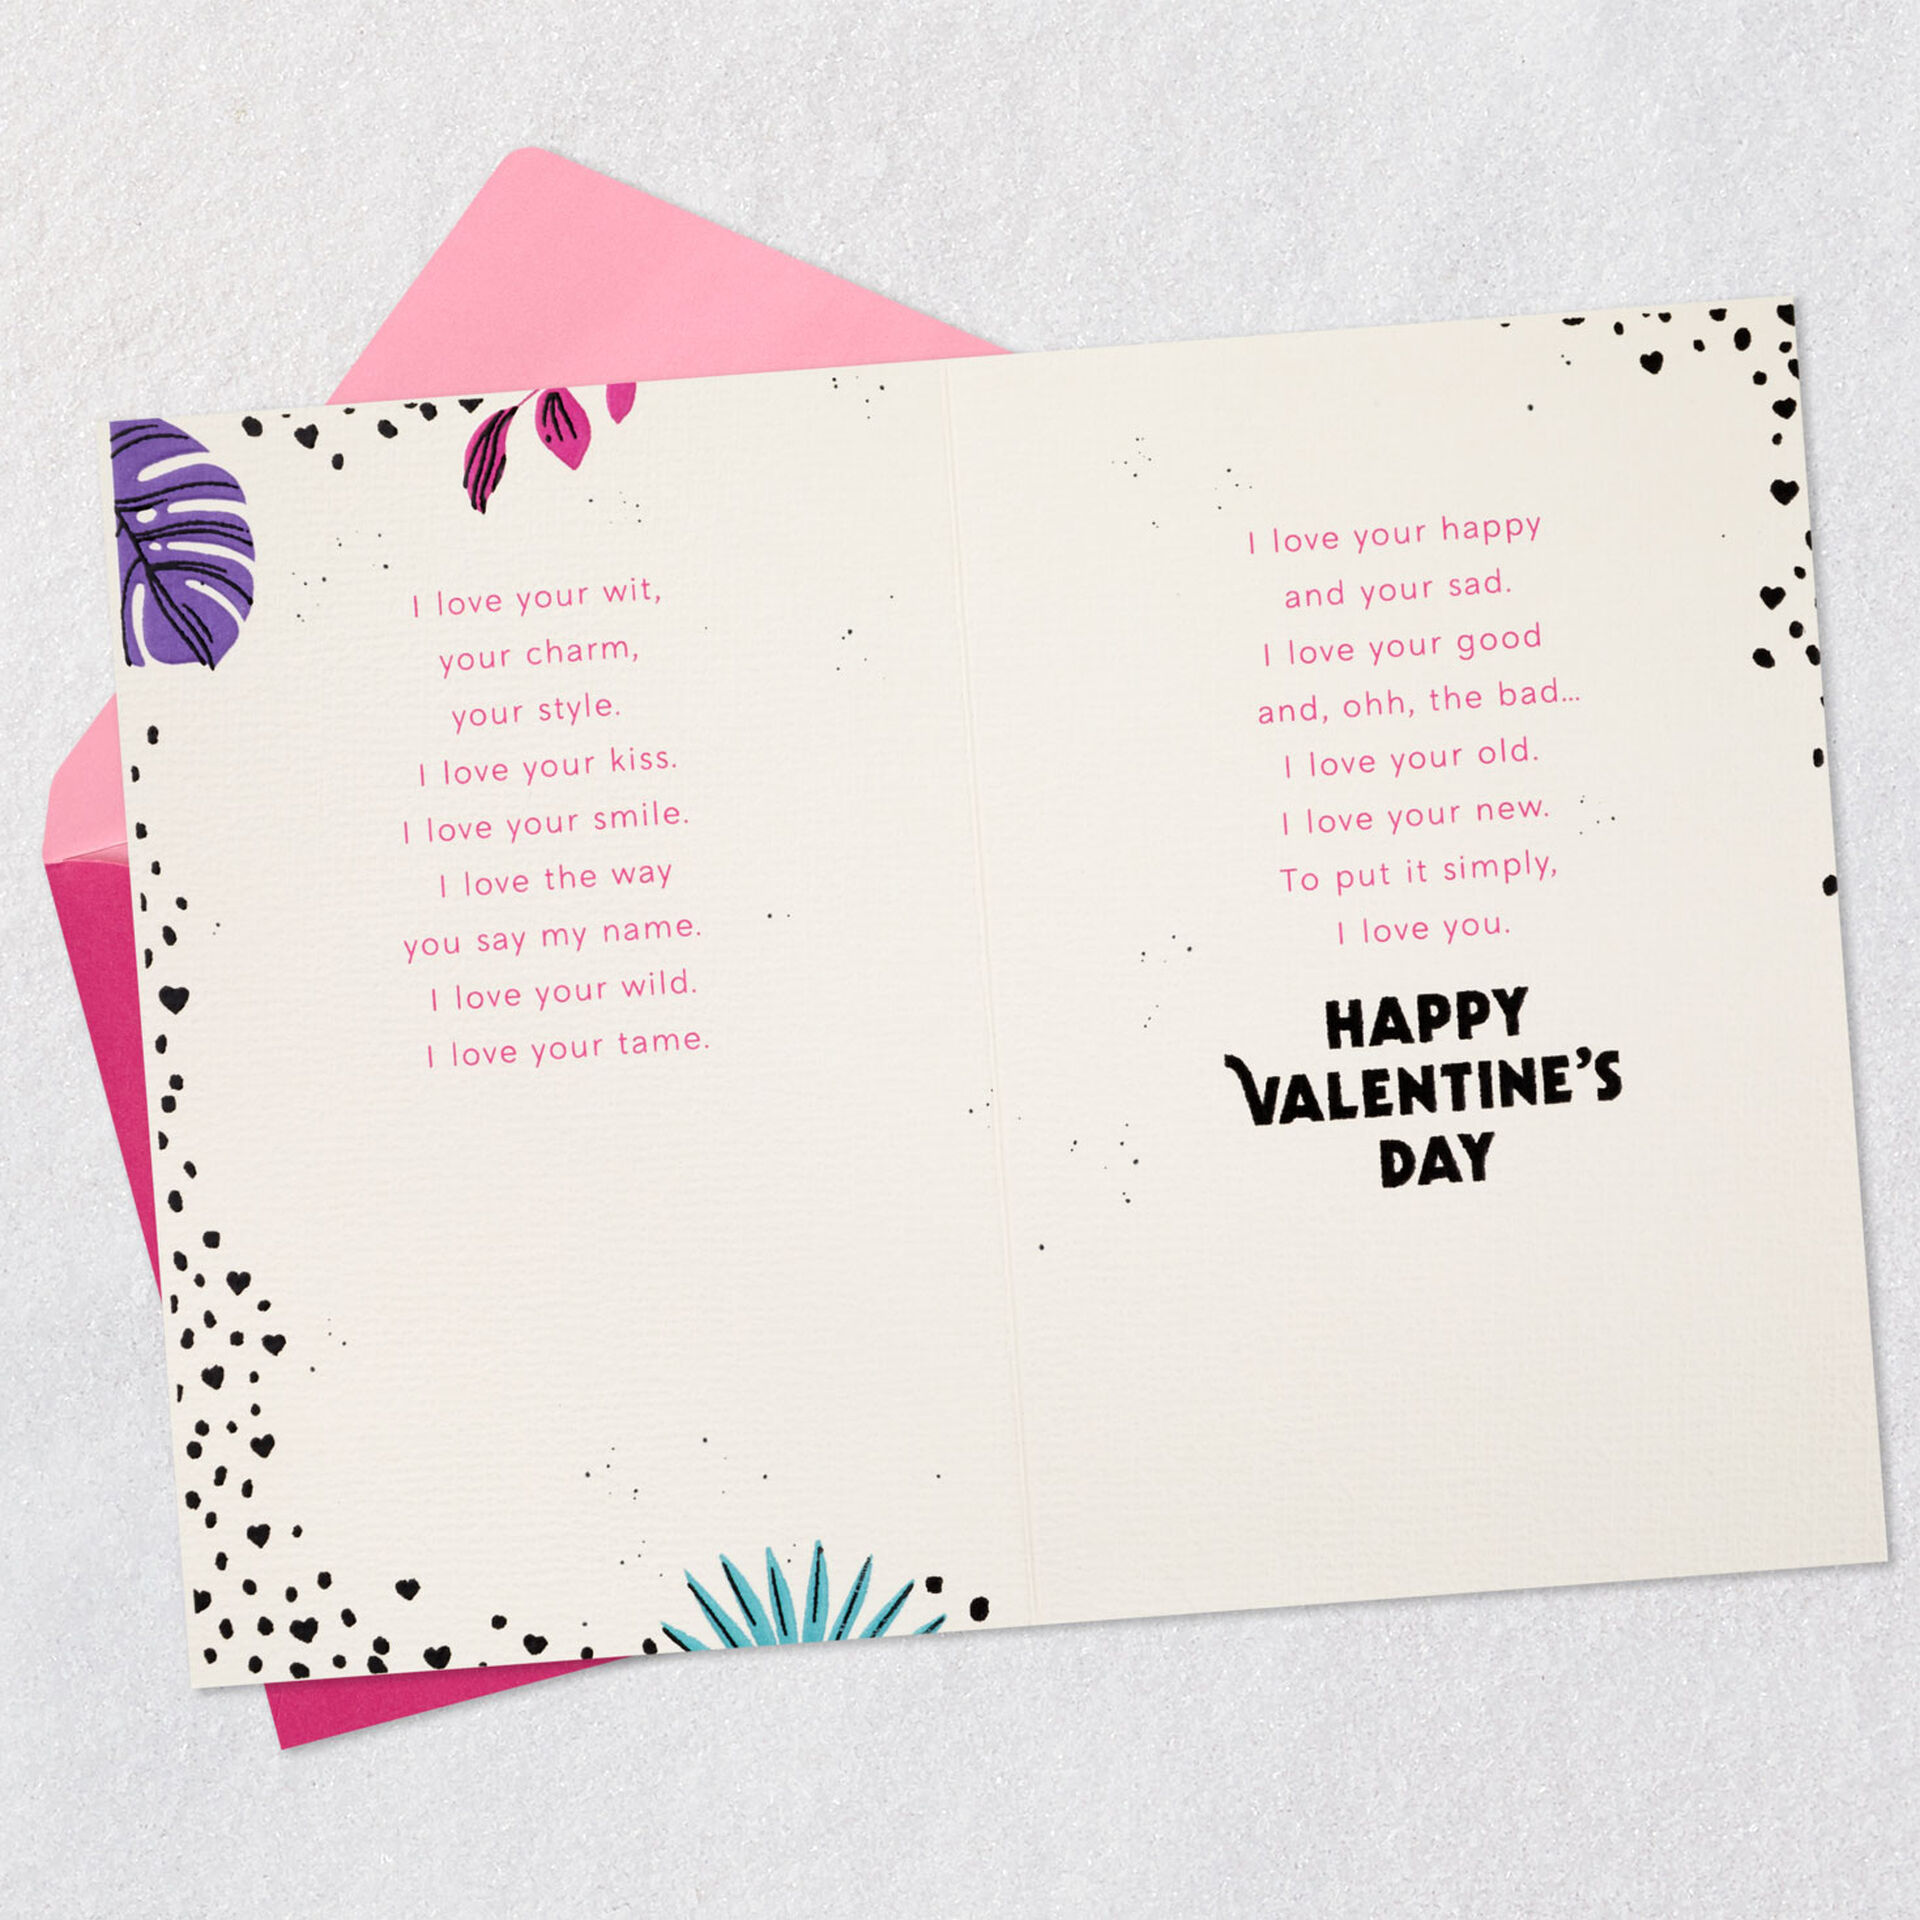 Leopards-and-Tropical-Leaves-Valentines-Day-Card_699VEE9669_04